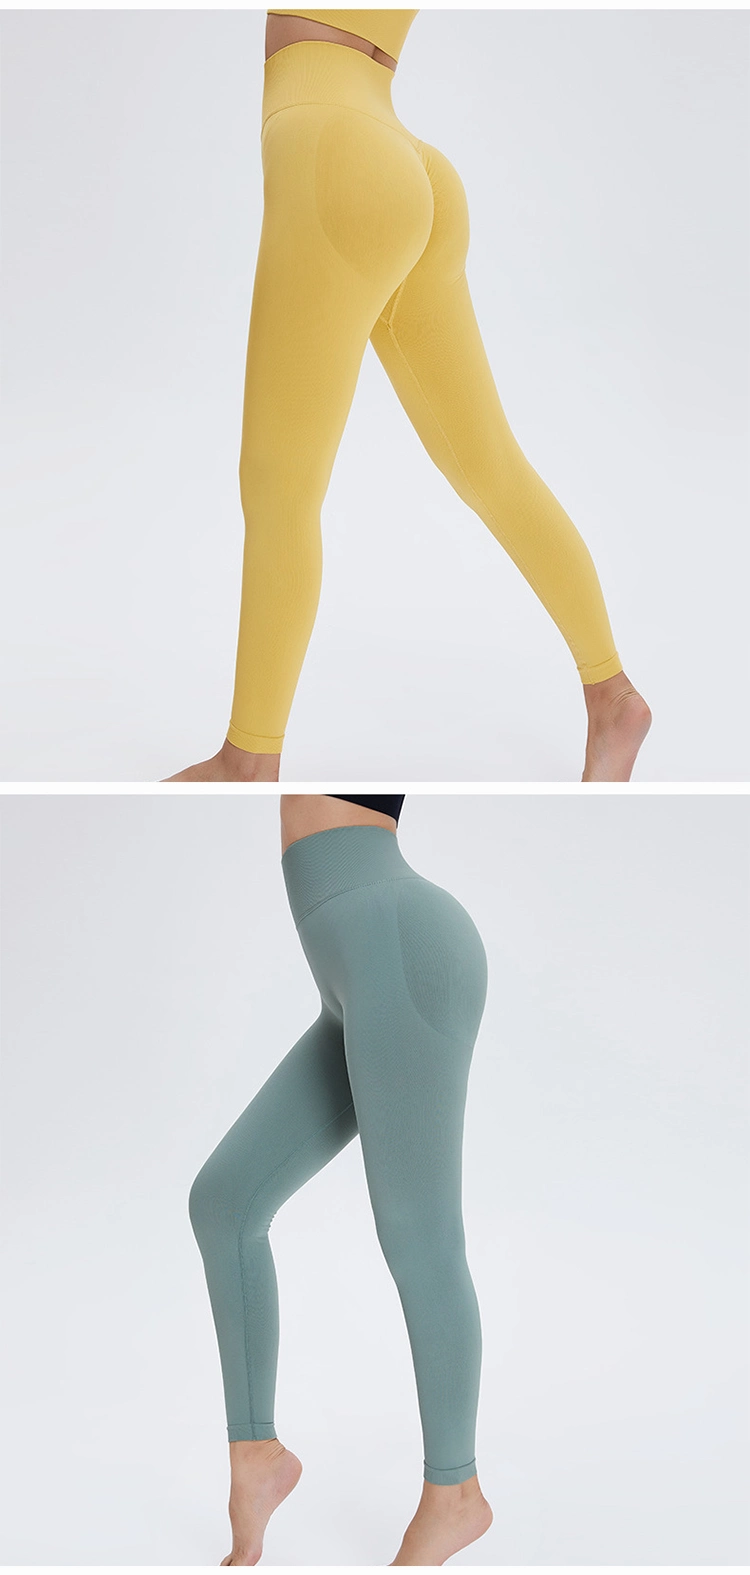 Ms0041 New Color Naked Feeling High Waist Tummy Control Yoga Leggings No T-Line Scrunch Peach Buttock Seamless Pants Girl